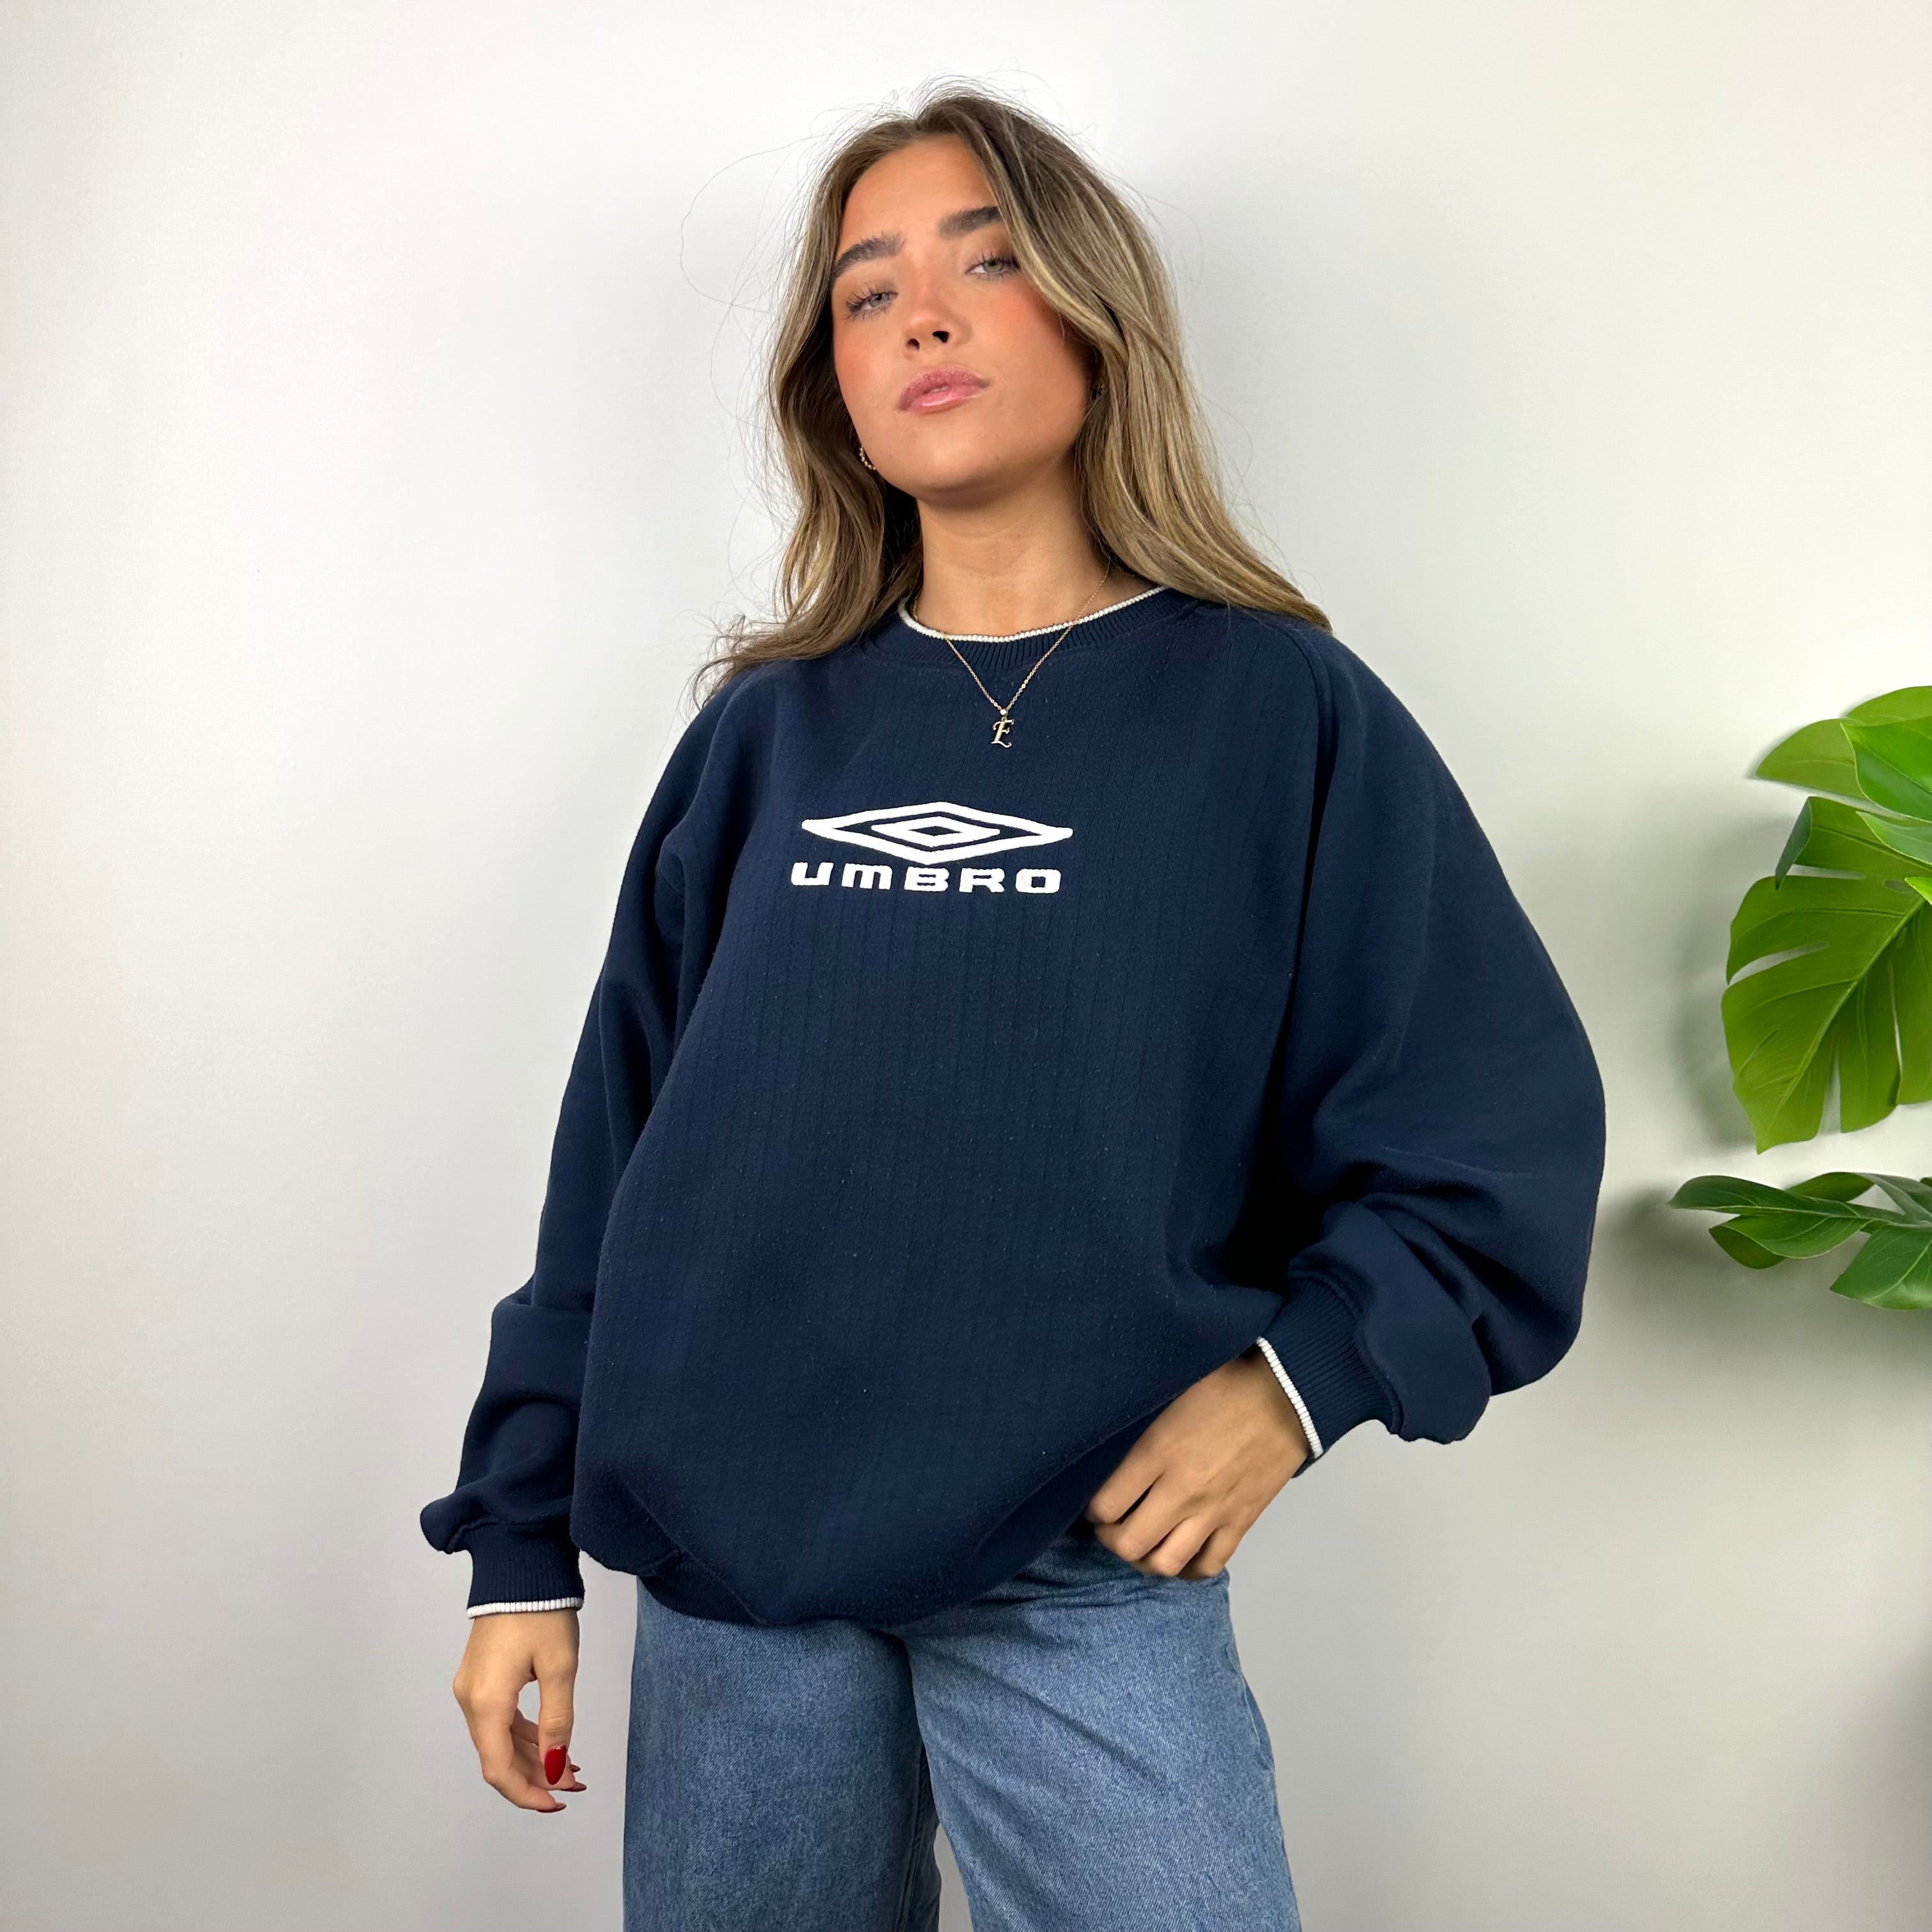 Umbro Navy Embroidered Spell Out Sweatshirt (XL)